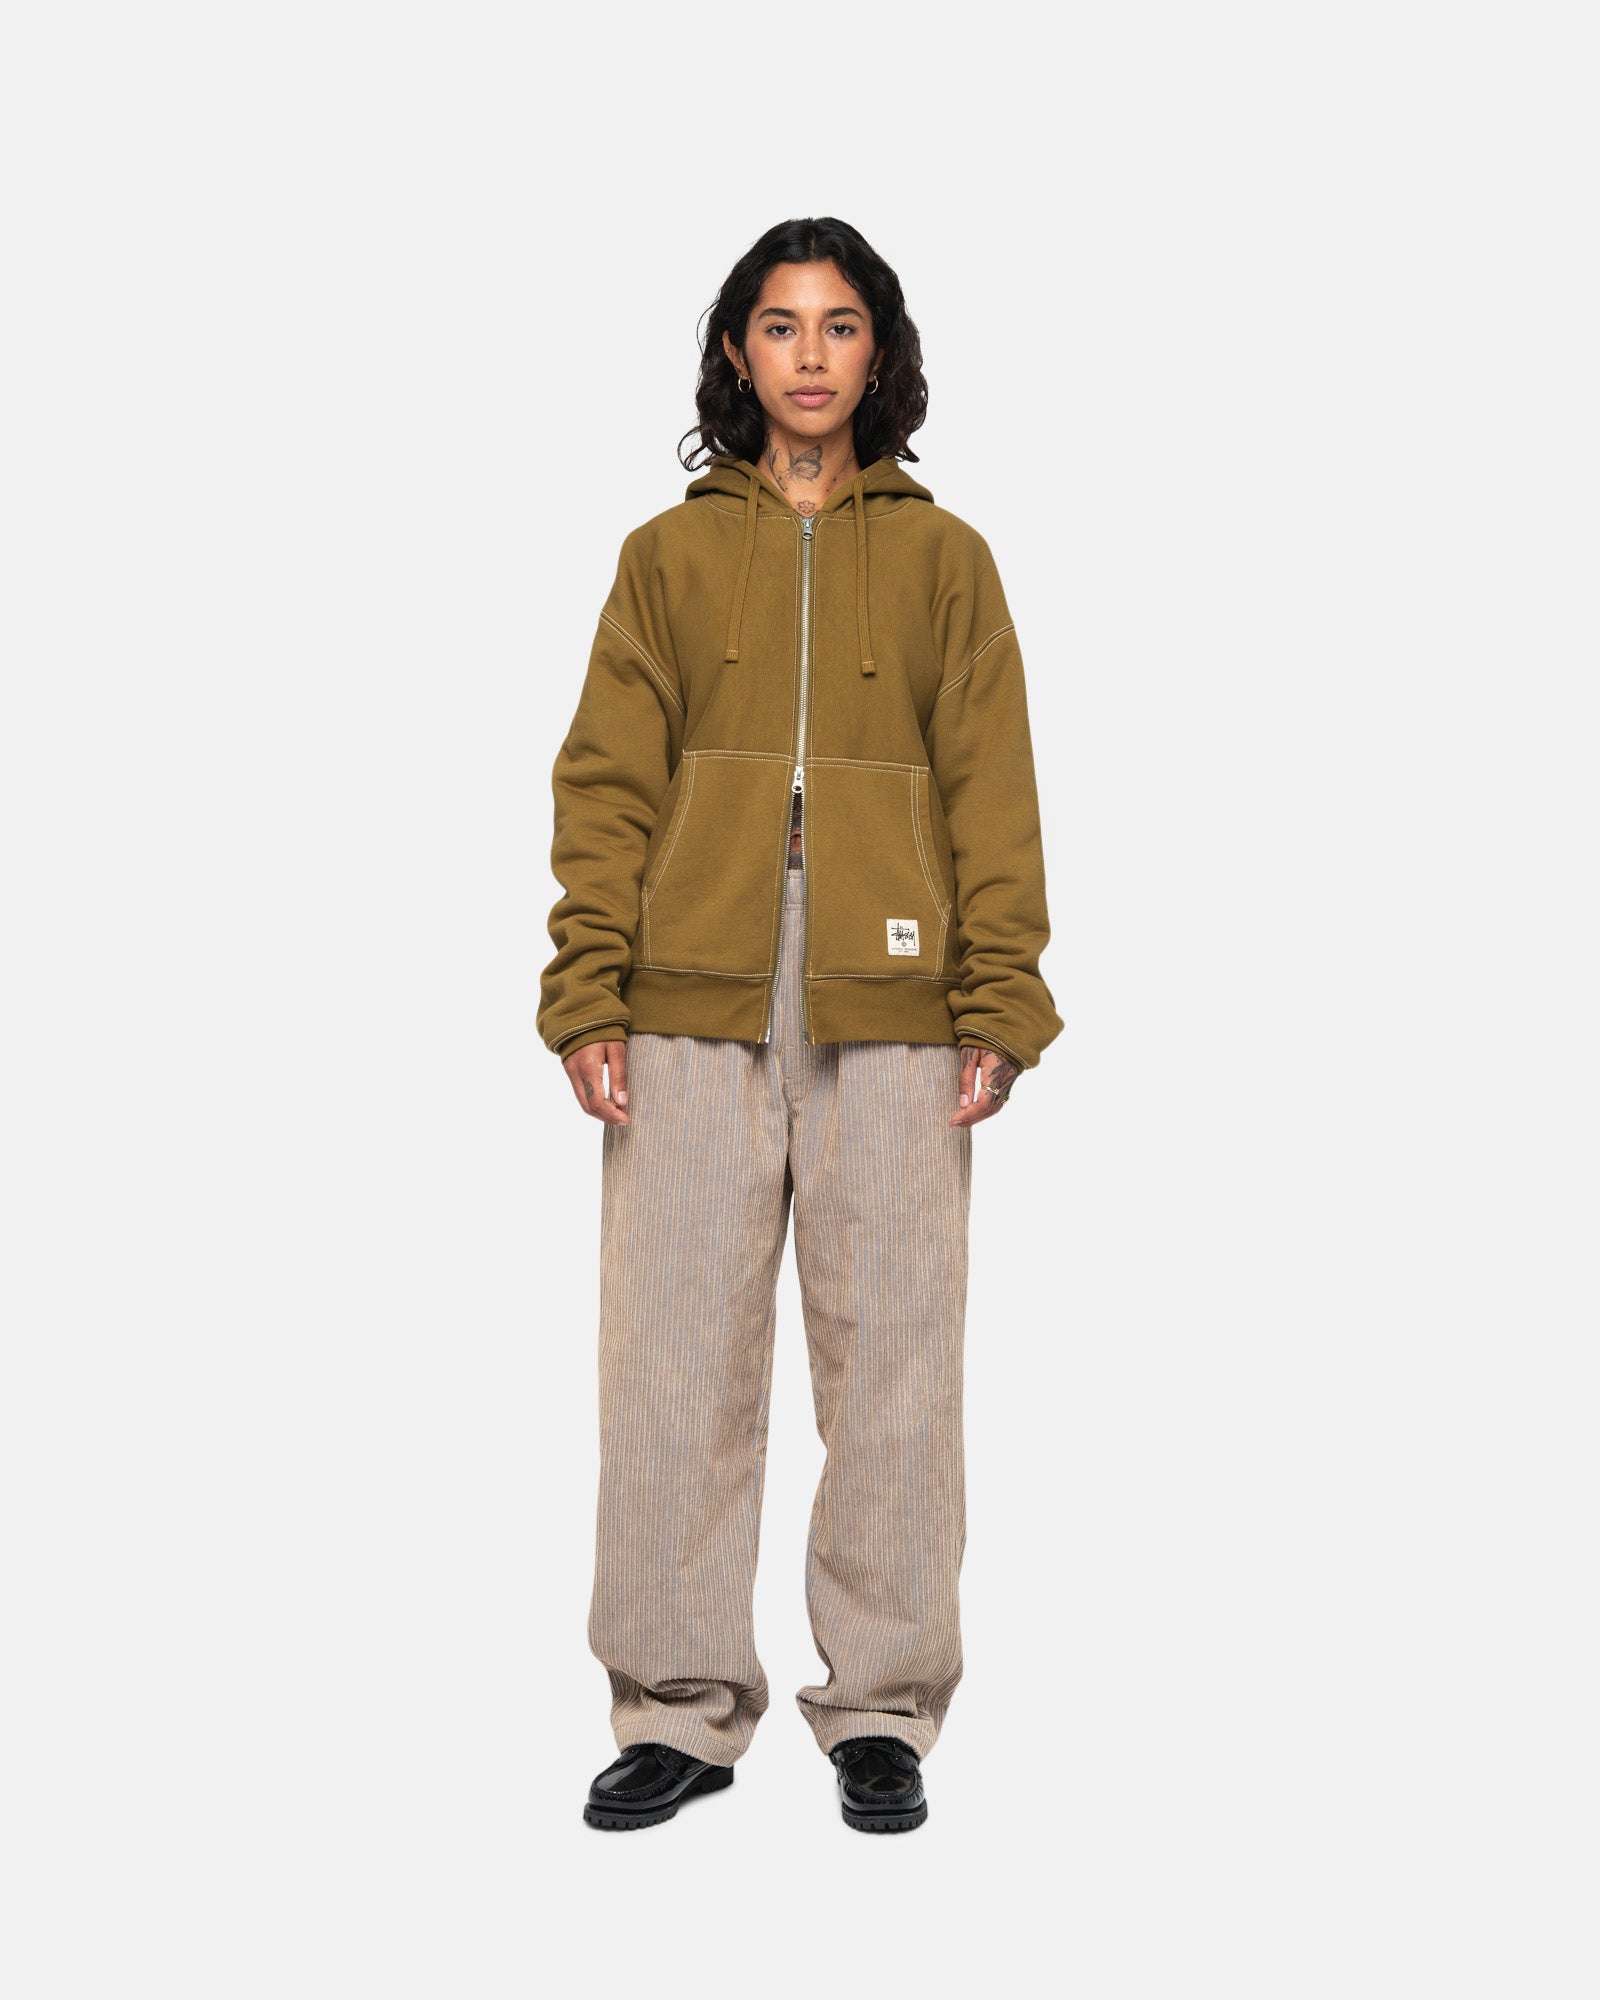 Double Face Label Zip Hoodie in olive – Stüssy Japan